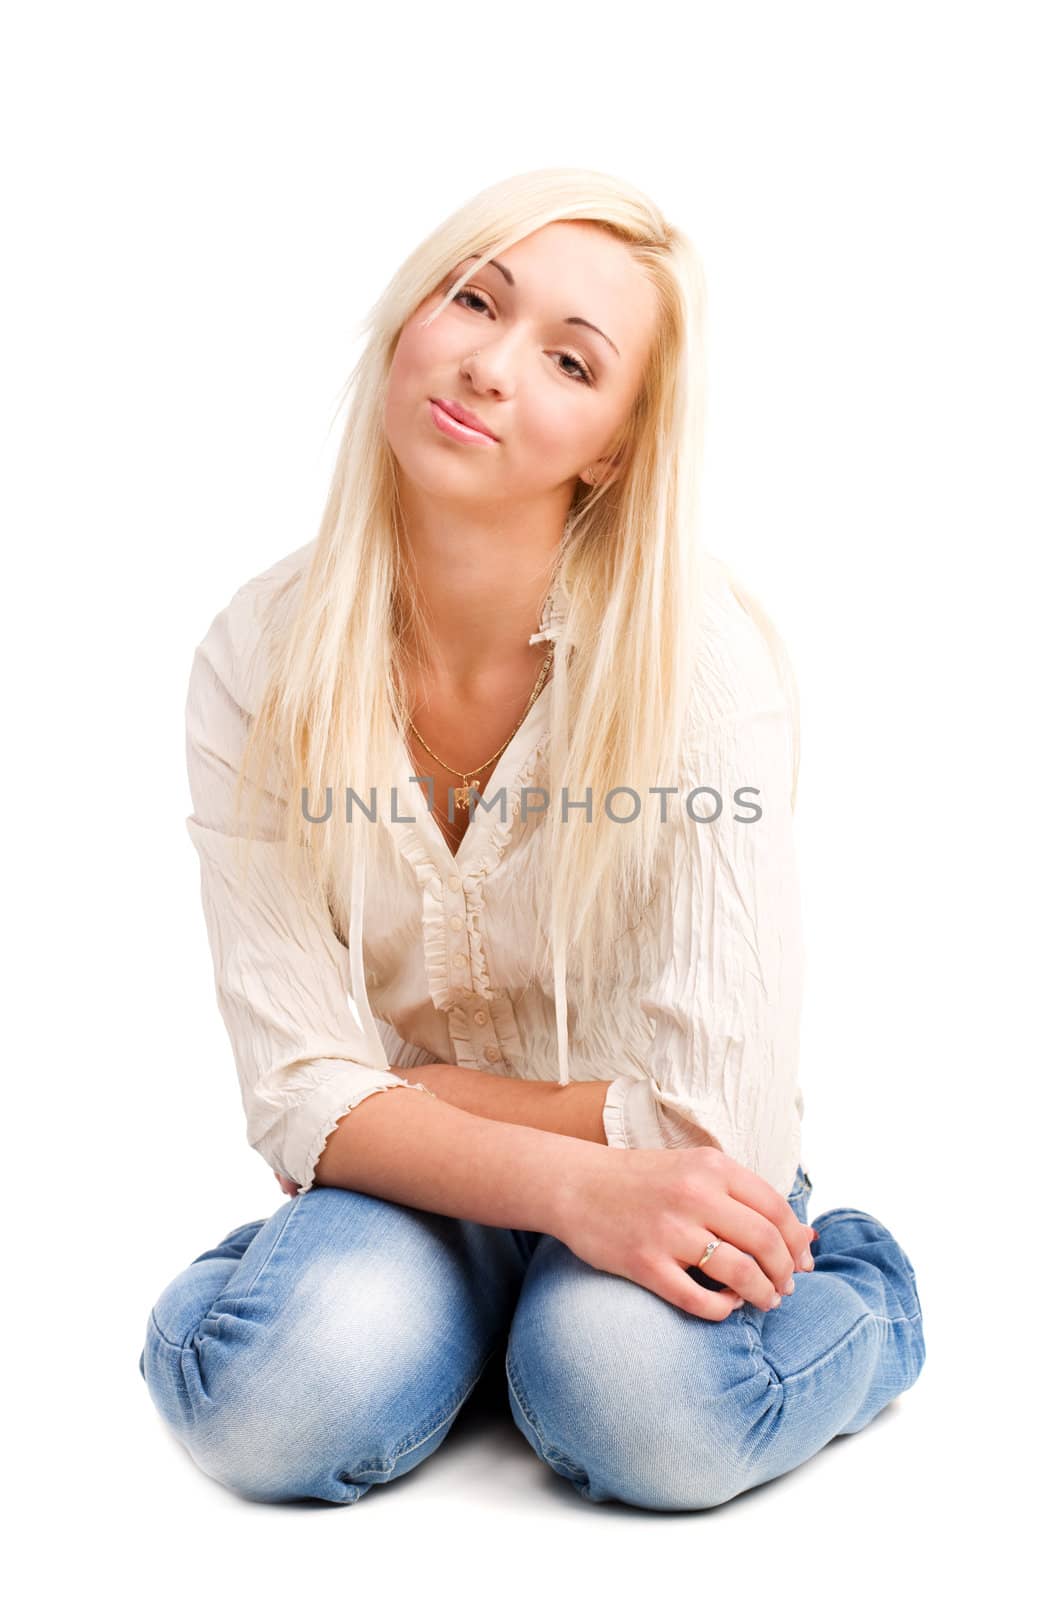 Cute young blond girl sitting on the floor